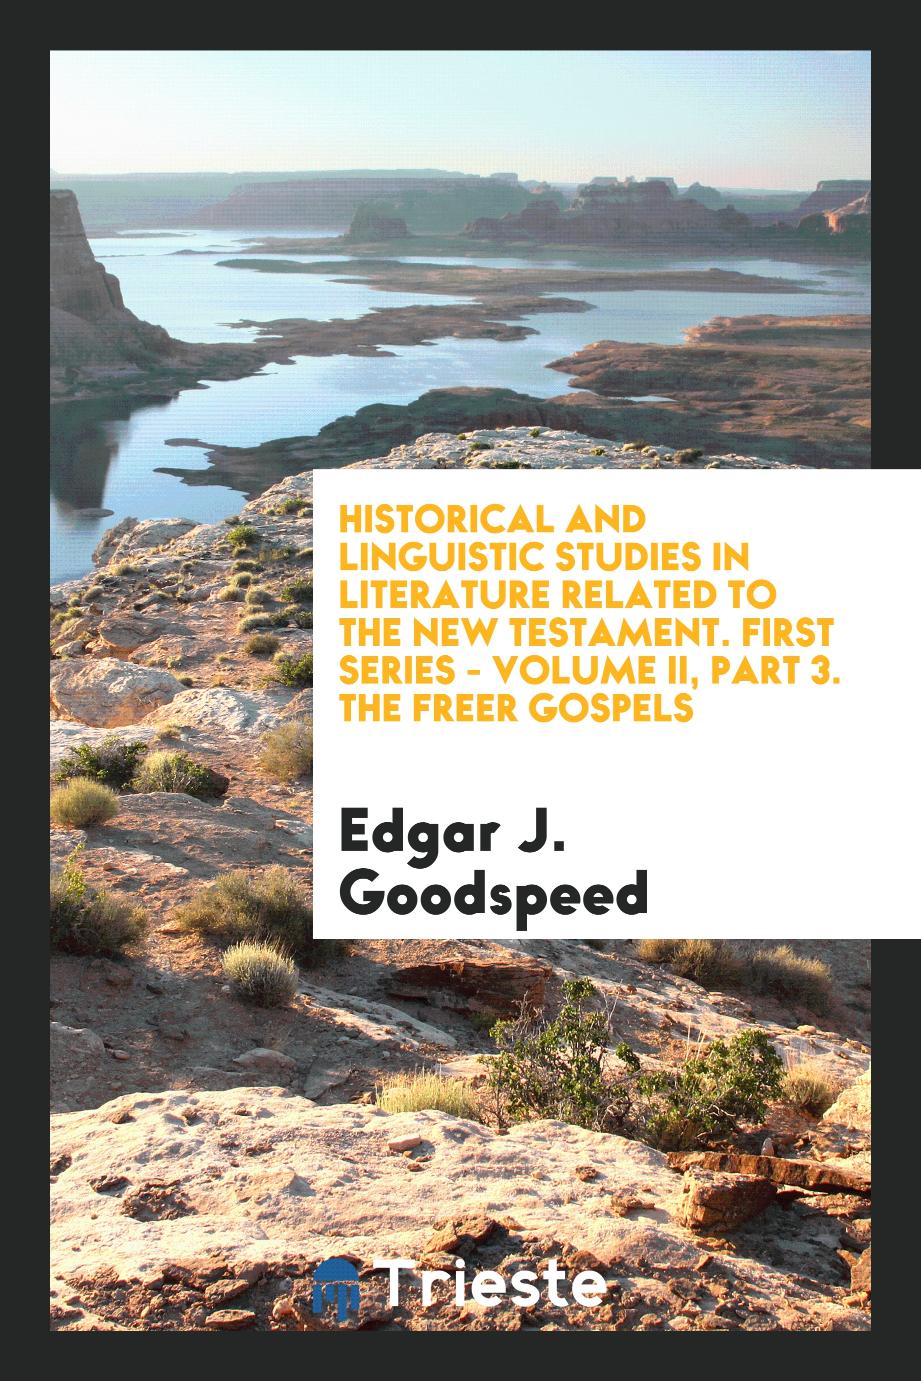 Historical and Linguistic studies in Literature Related to the New Testament. First Series - Volume II, part 3. The Freer Gospels